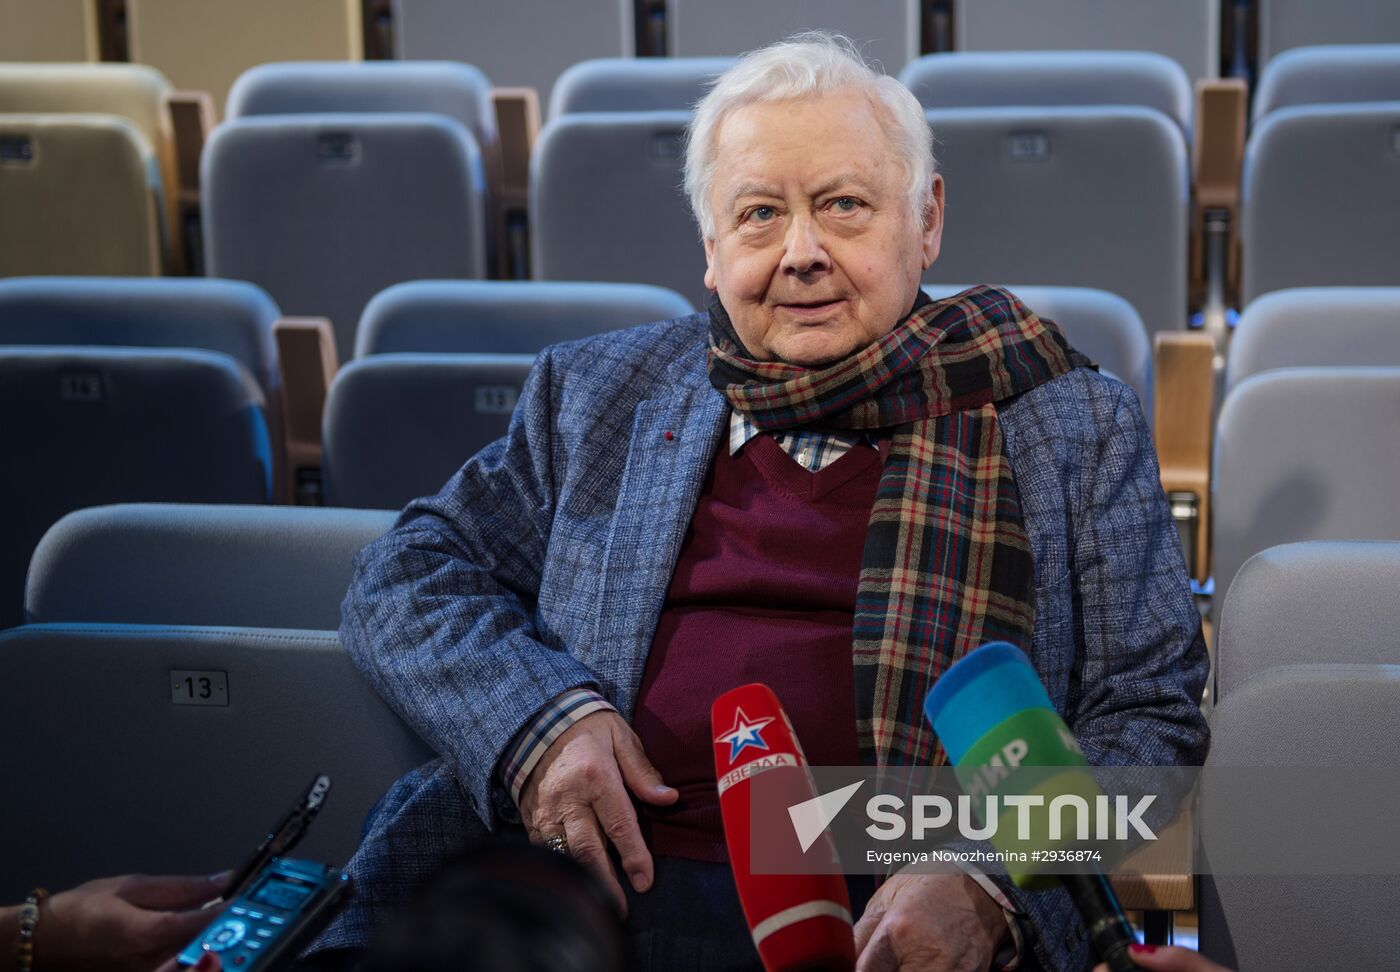 Opening of new stage of the Moscow theatre - "The Stage on Sukharevskaya" - under the direction of Oleg Tabakov